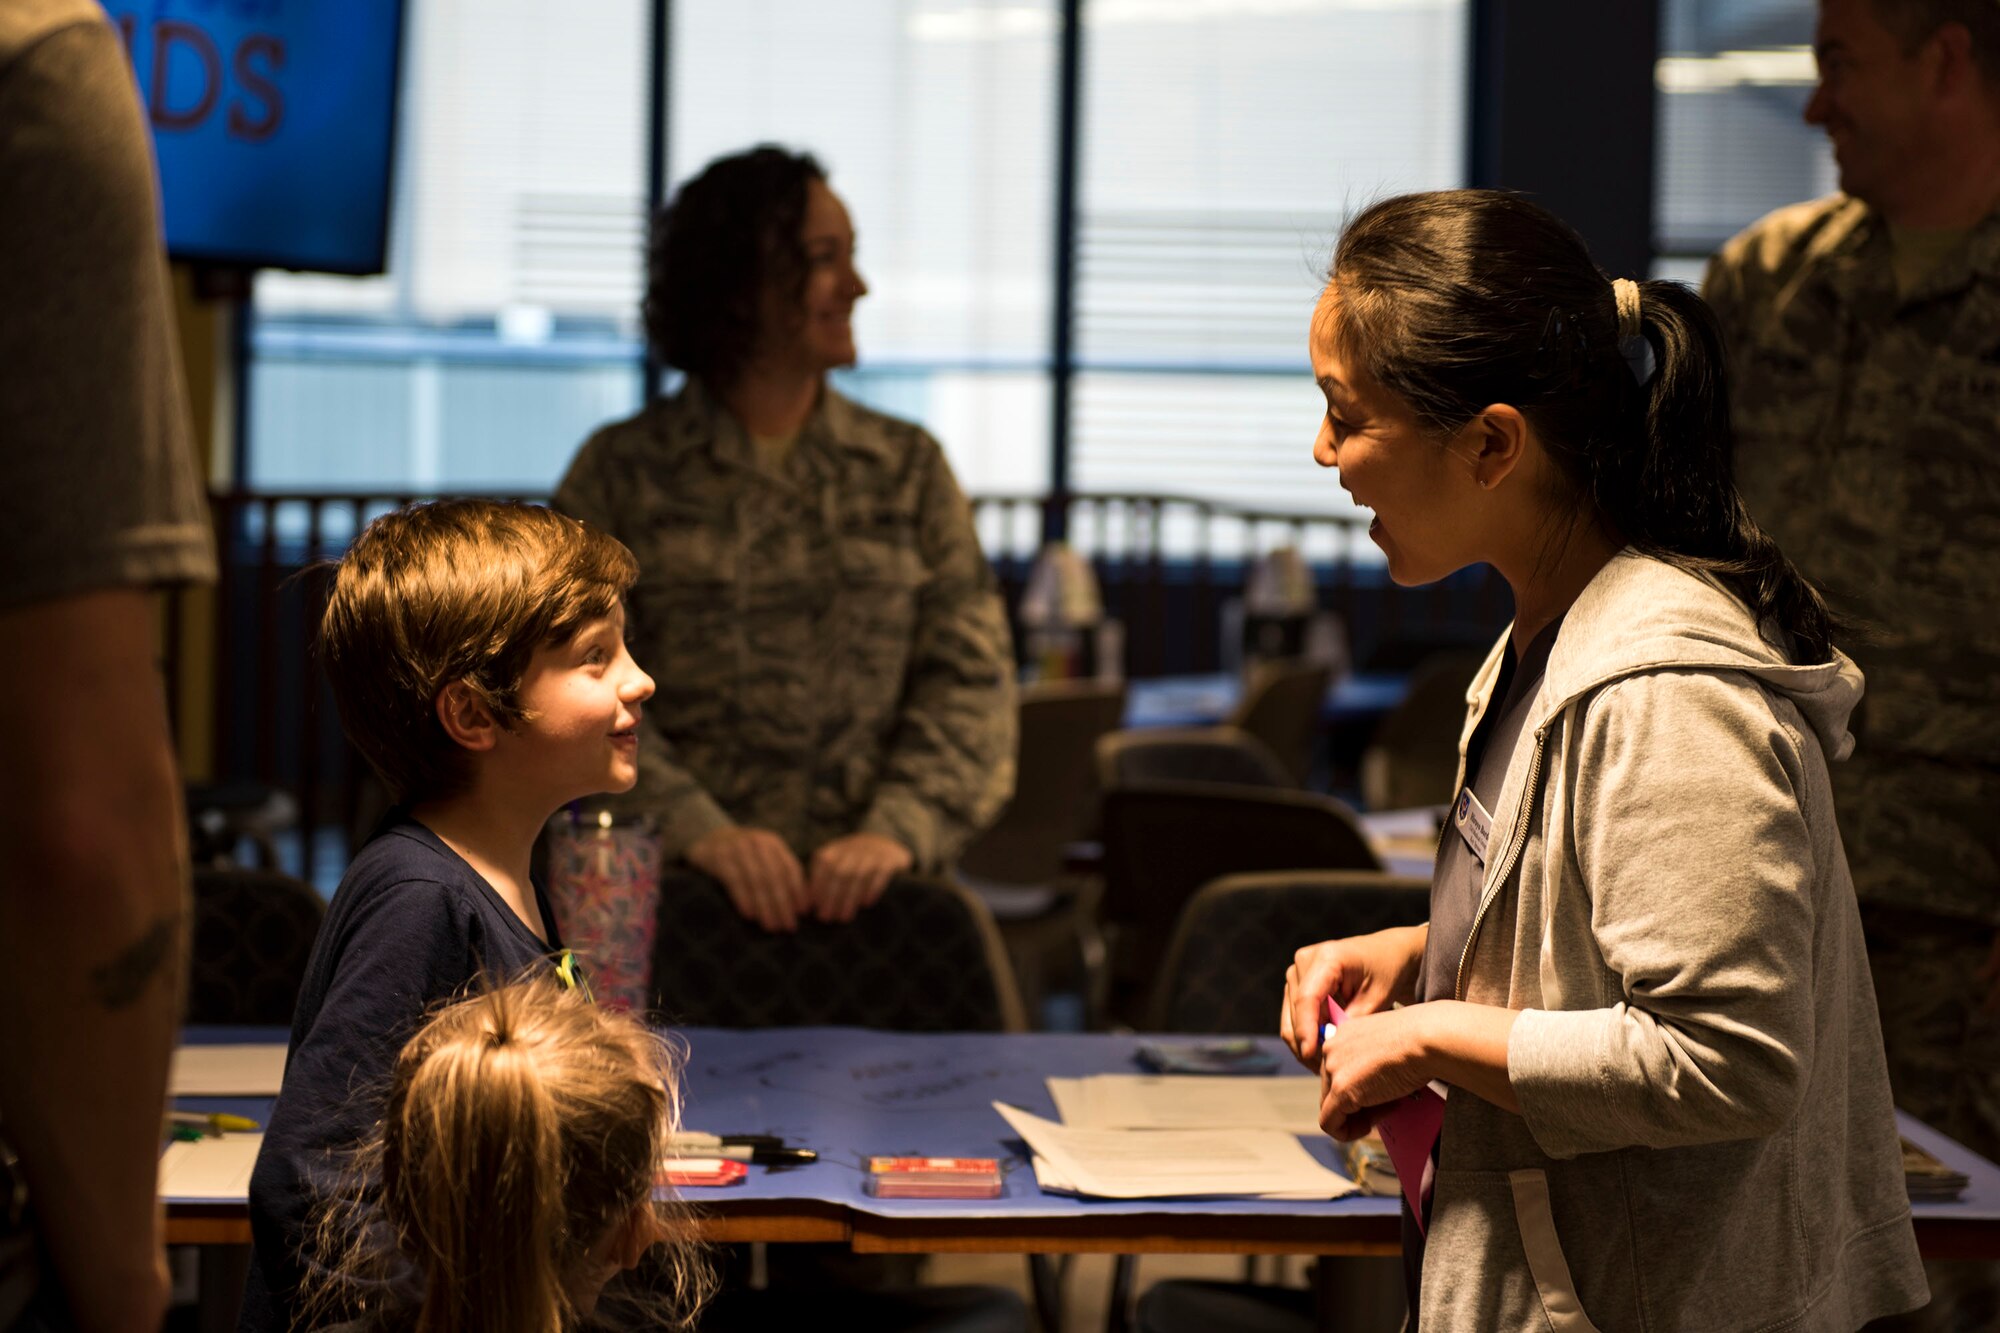 A key spouse talks to a participant during a deployed spouse dinner, April 23, 2019, at Moody Air Force Base, Ga. The dinner served as an opportunity for the families of deployed members to bond and provide relief. The mission’s success depends on resilient Airmen and families, who are prepared to make sacrifices with the support of their fellow Airmen, local communities and leadership. (U.S. Air Force photo by Senior Airman Erick Requadt)